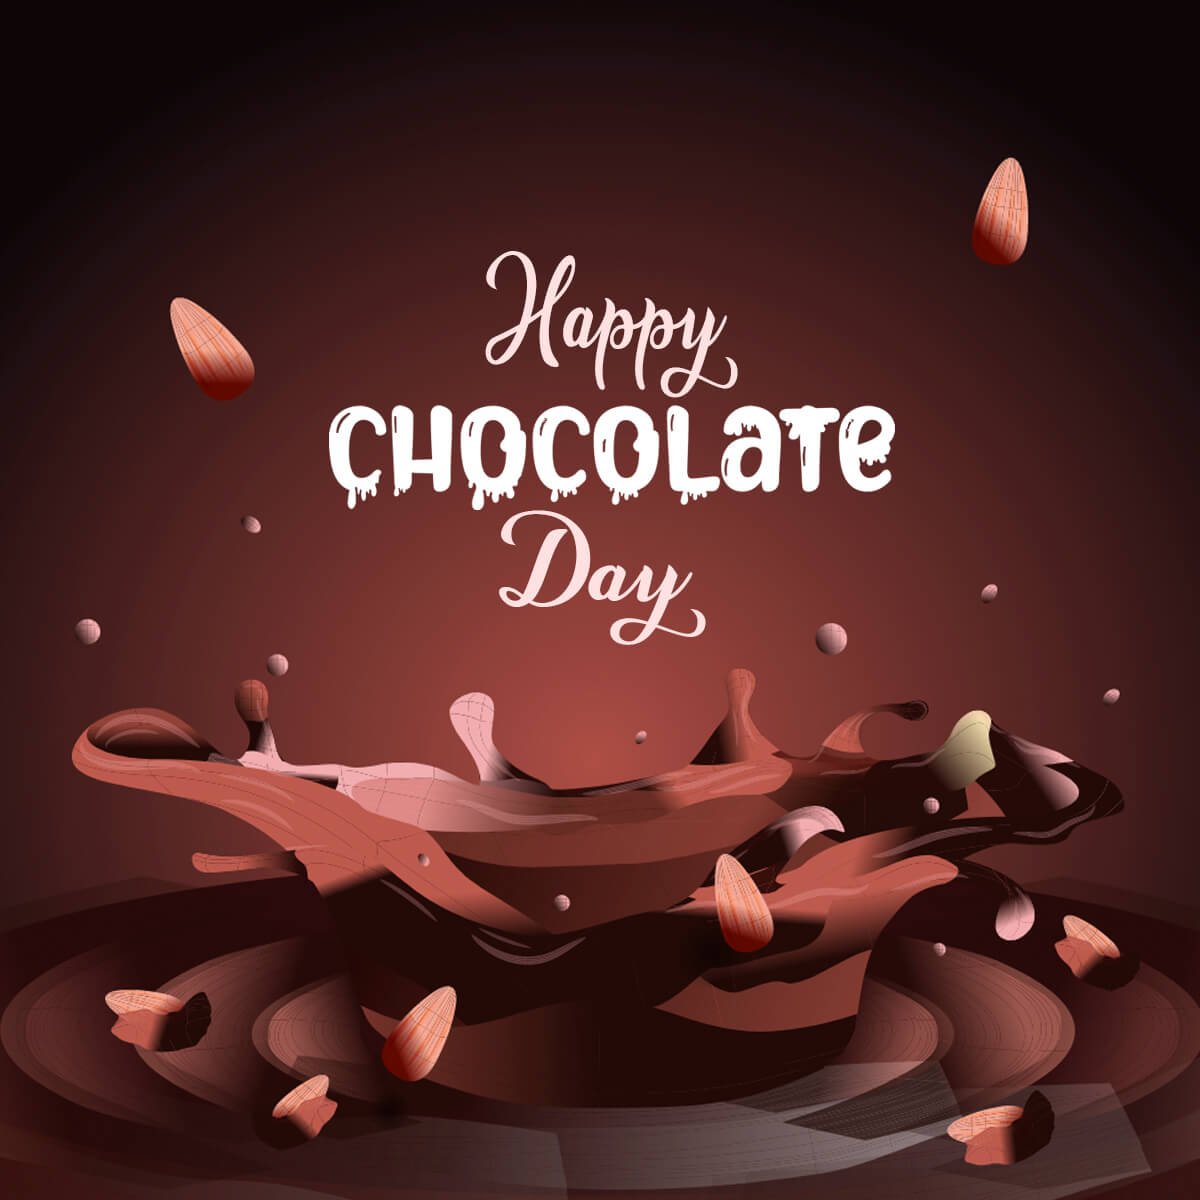 Happy chocolate day wishing special theme design - Pngfreepic